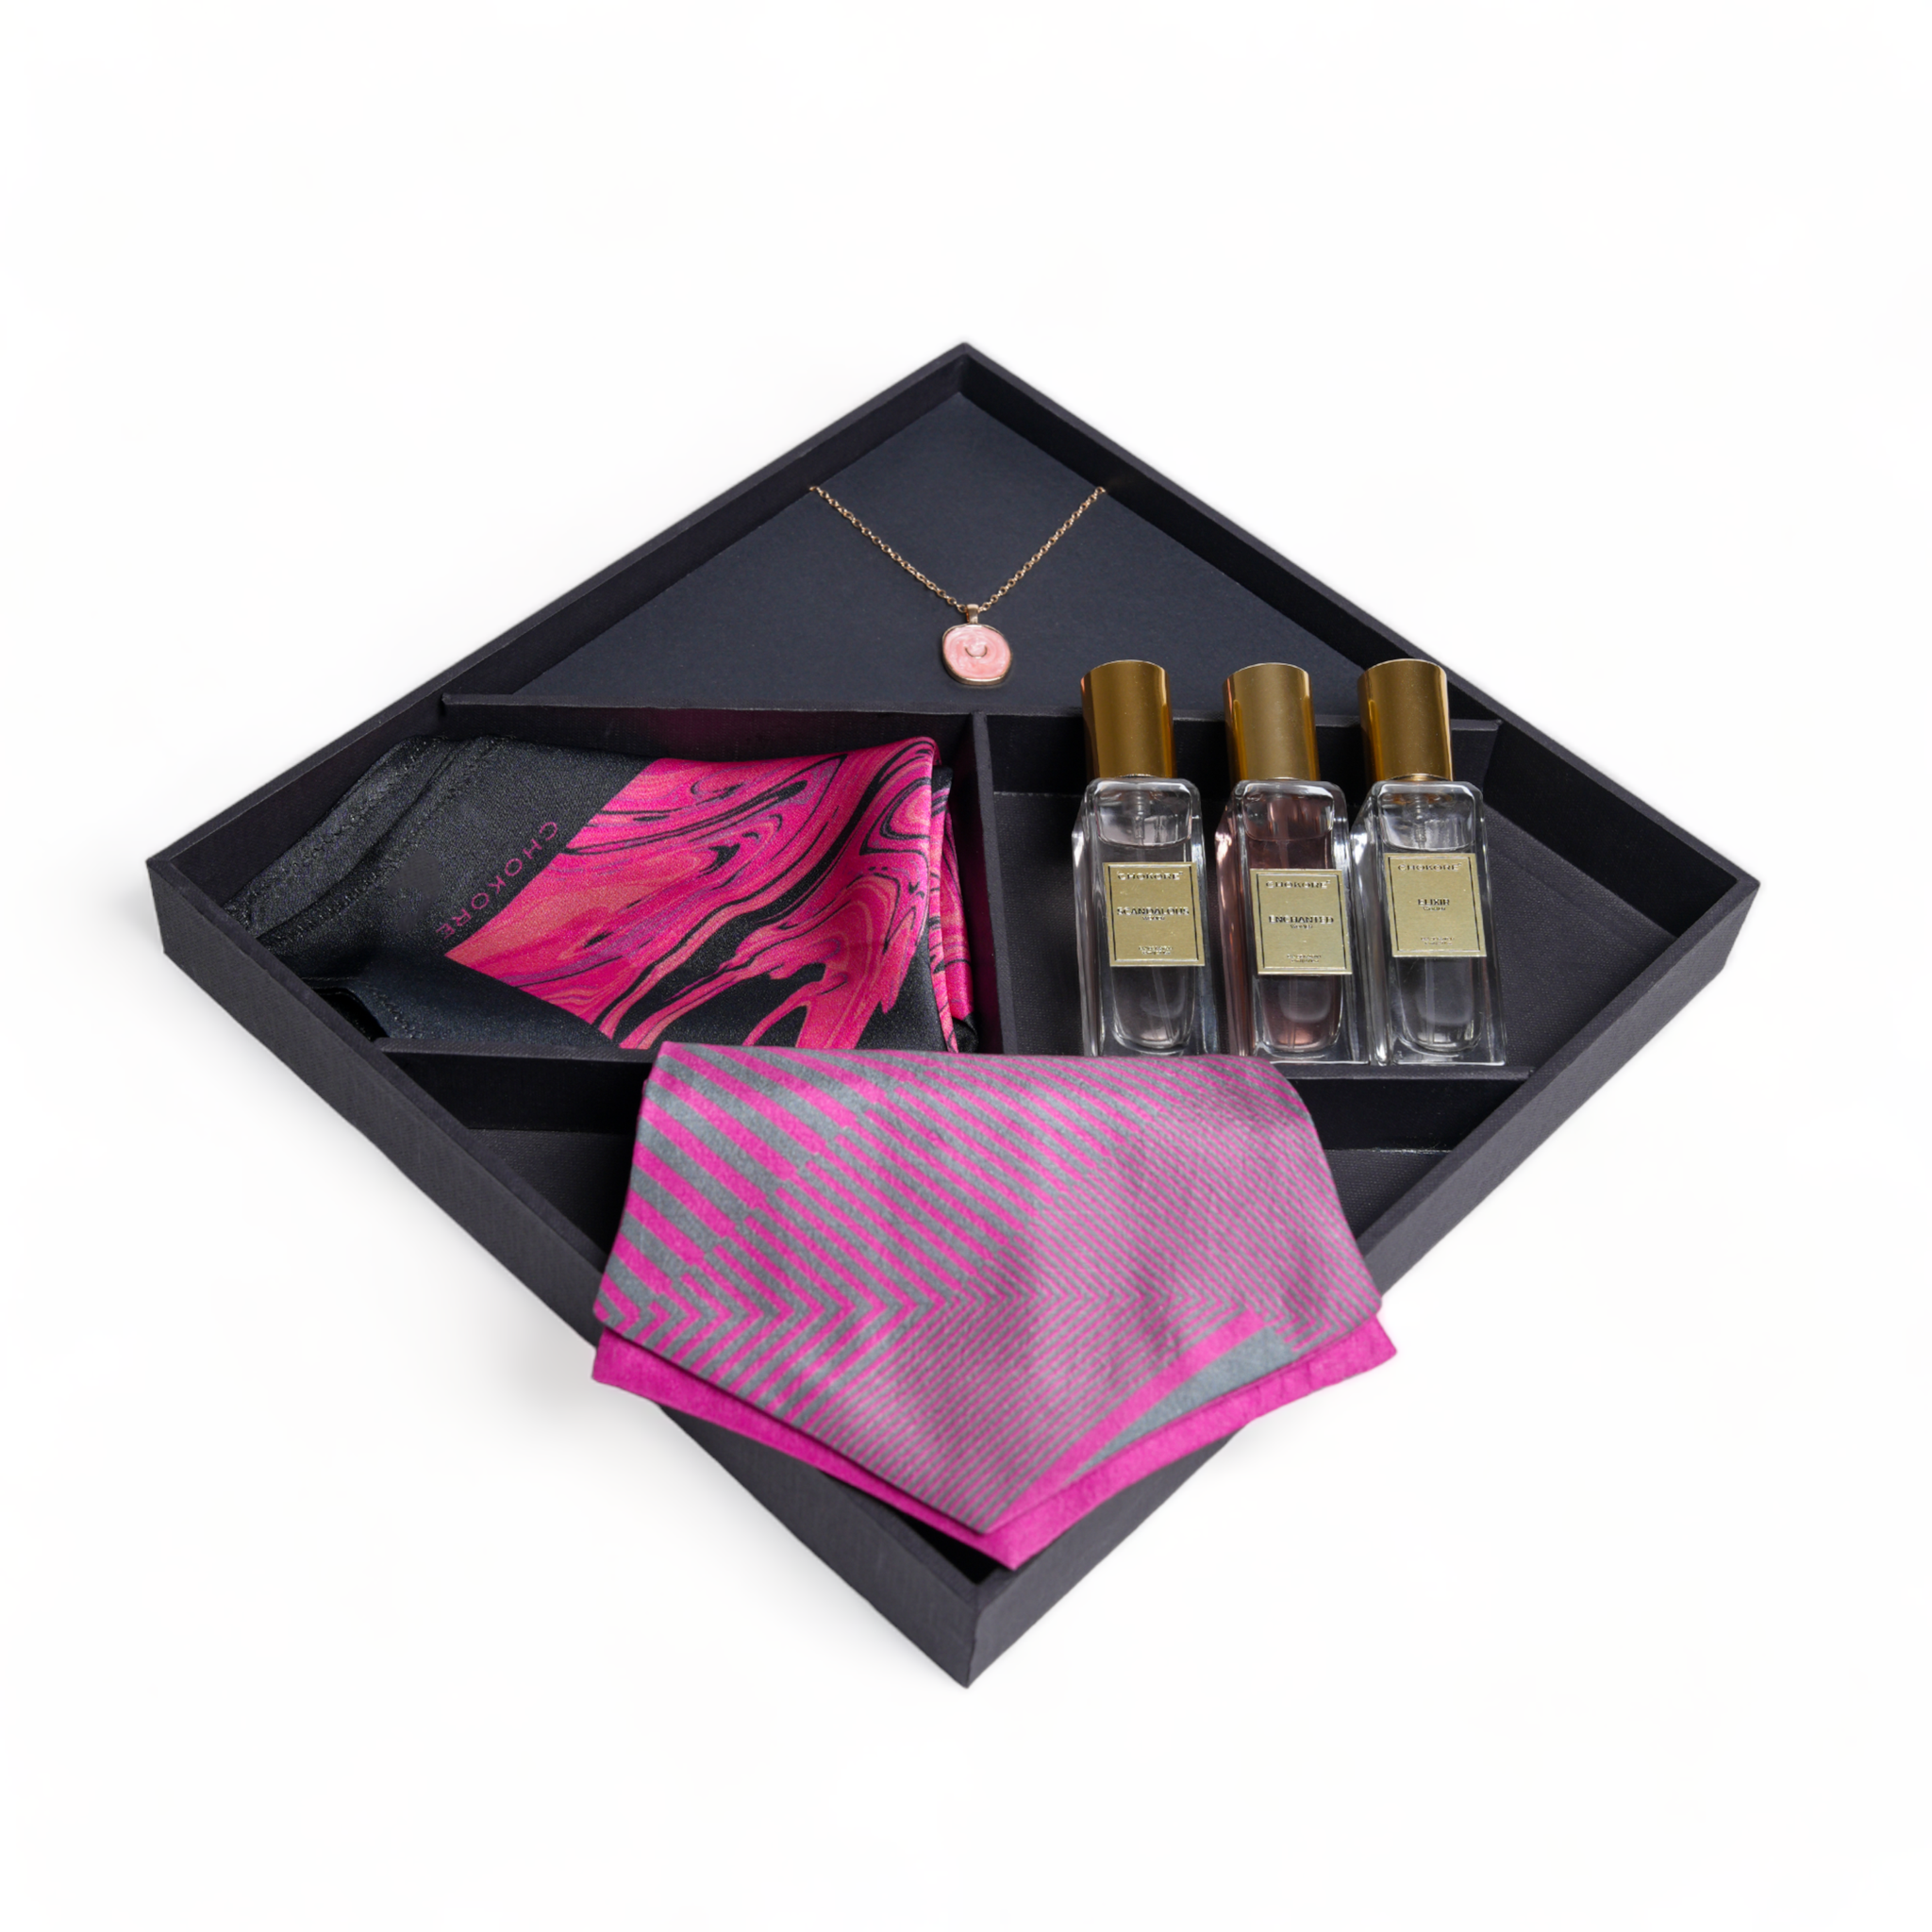 Chokore Special 4-in-1 Gift Set for Him & Her (Silk Pocket Square, Cravat, Pendant with Chain, Perfumes Combo)